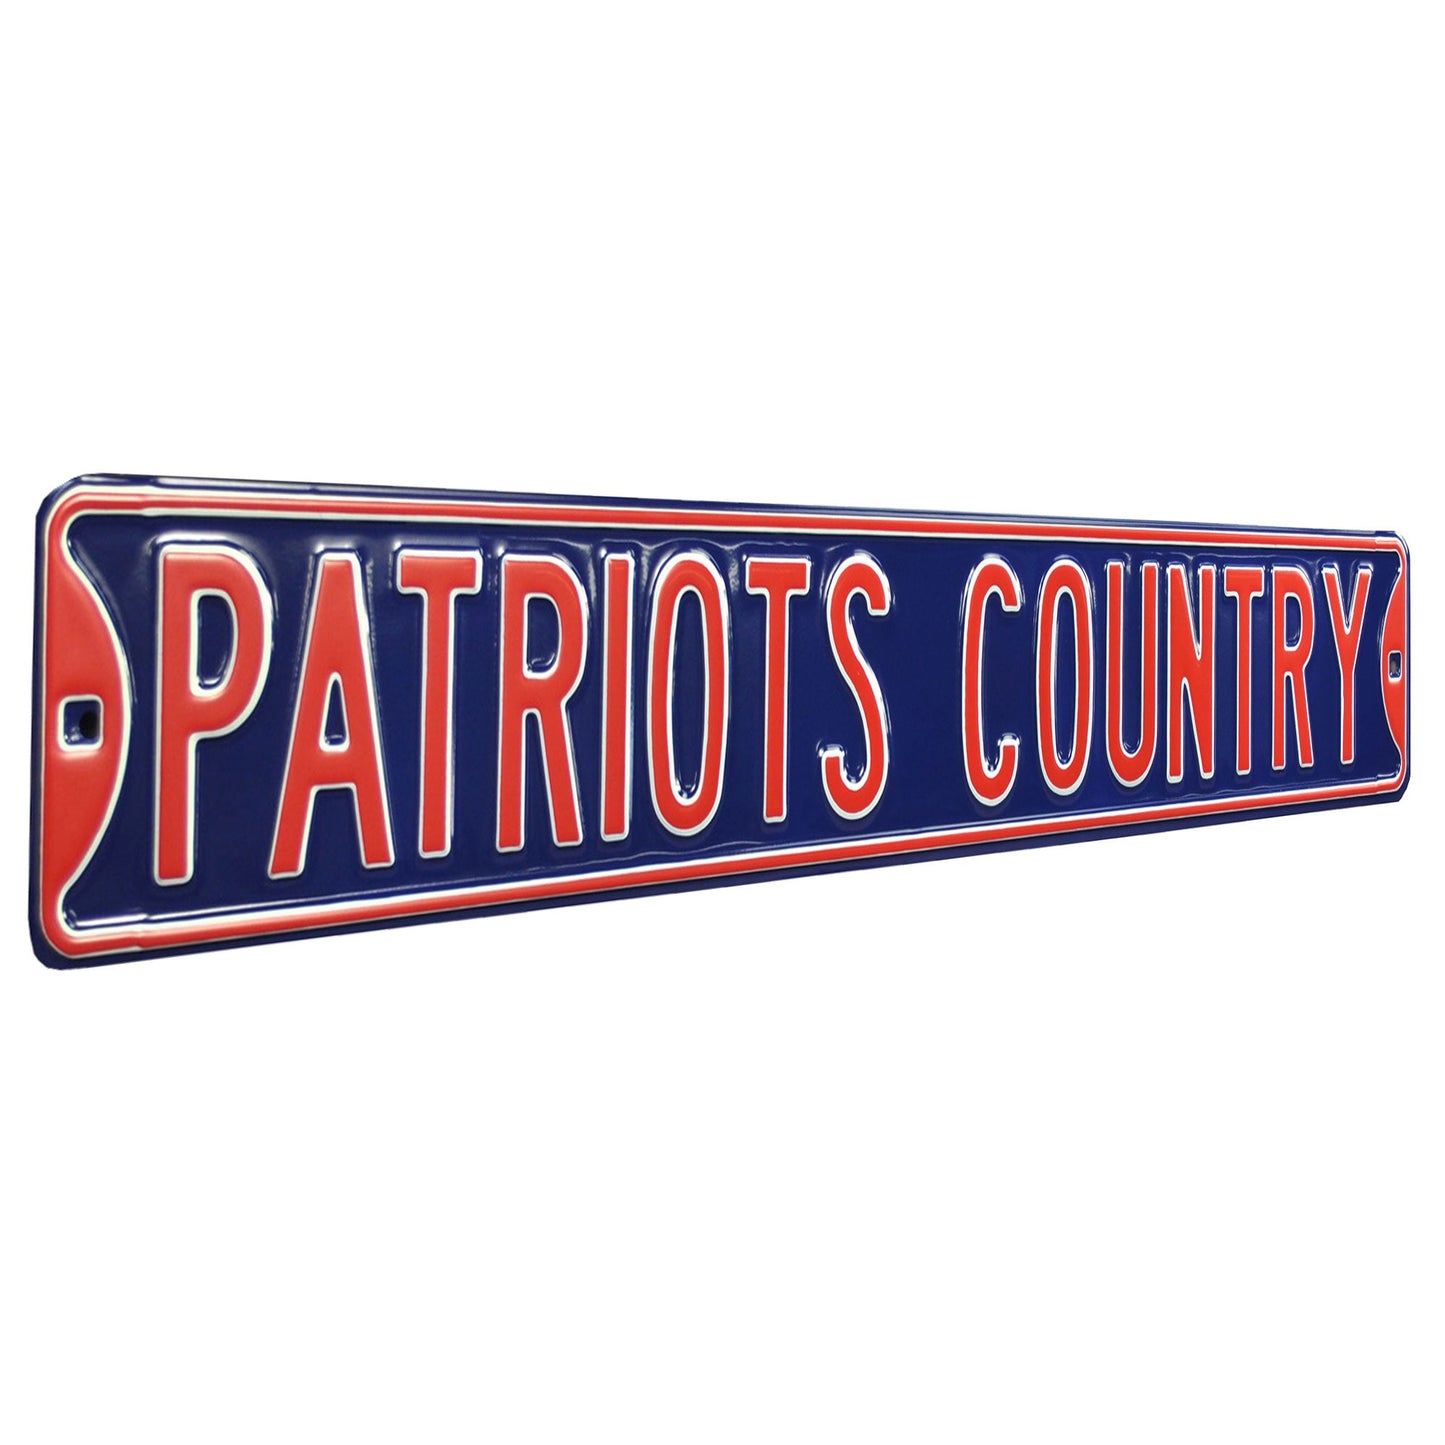 New England Patriots - PATRIOTS COUNTRY - Embossed Steel Street Sign